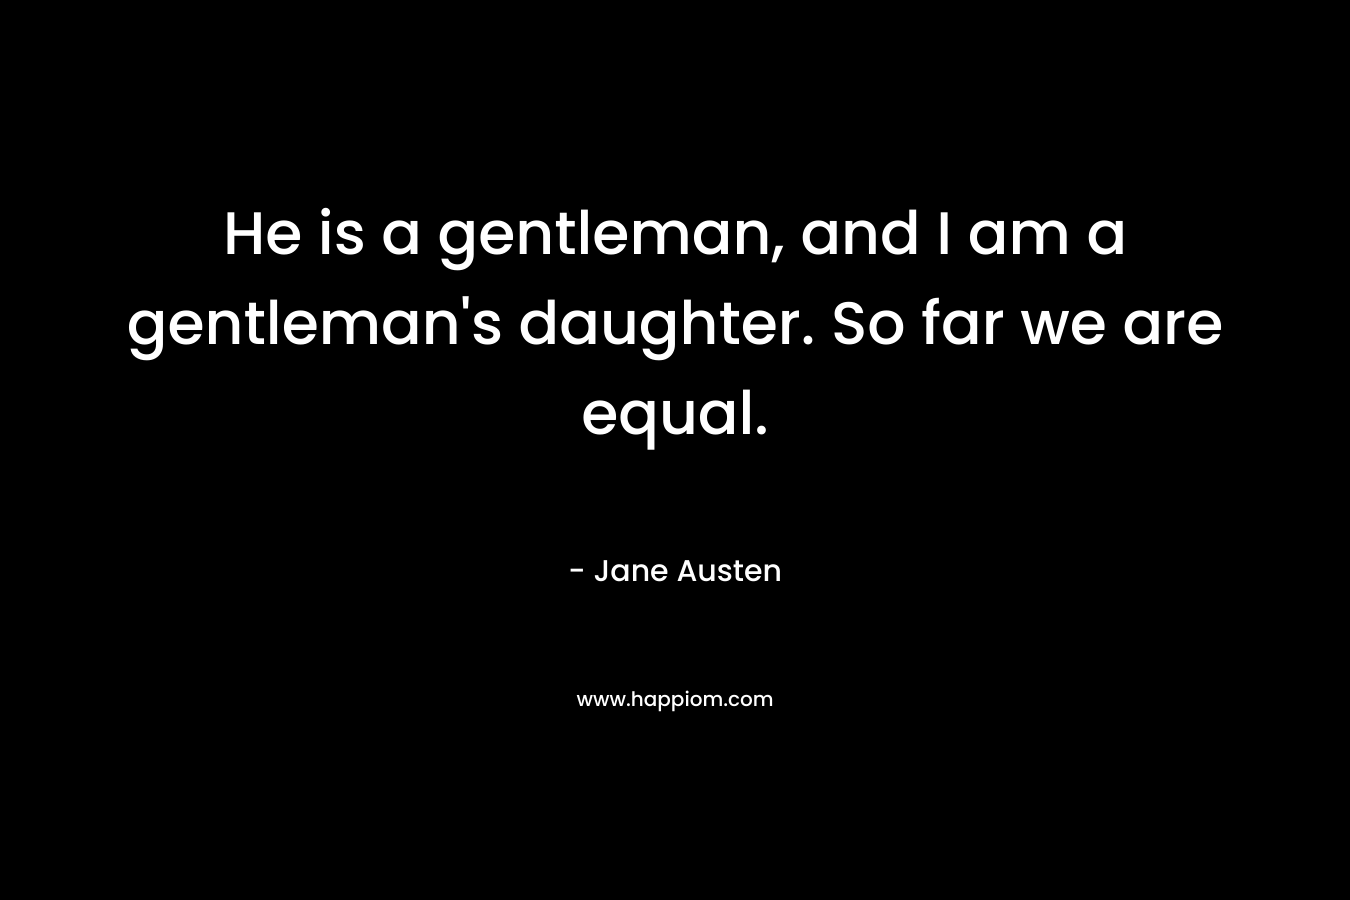 He is a gentleman, and I am a gentleman's daughter. So far we are equal.